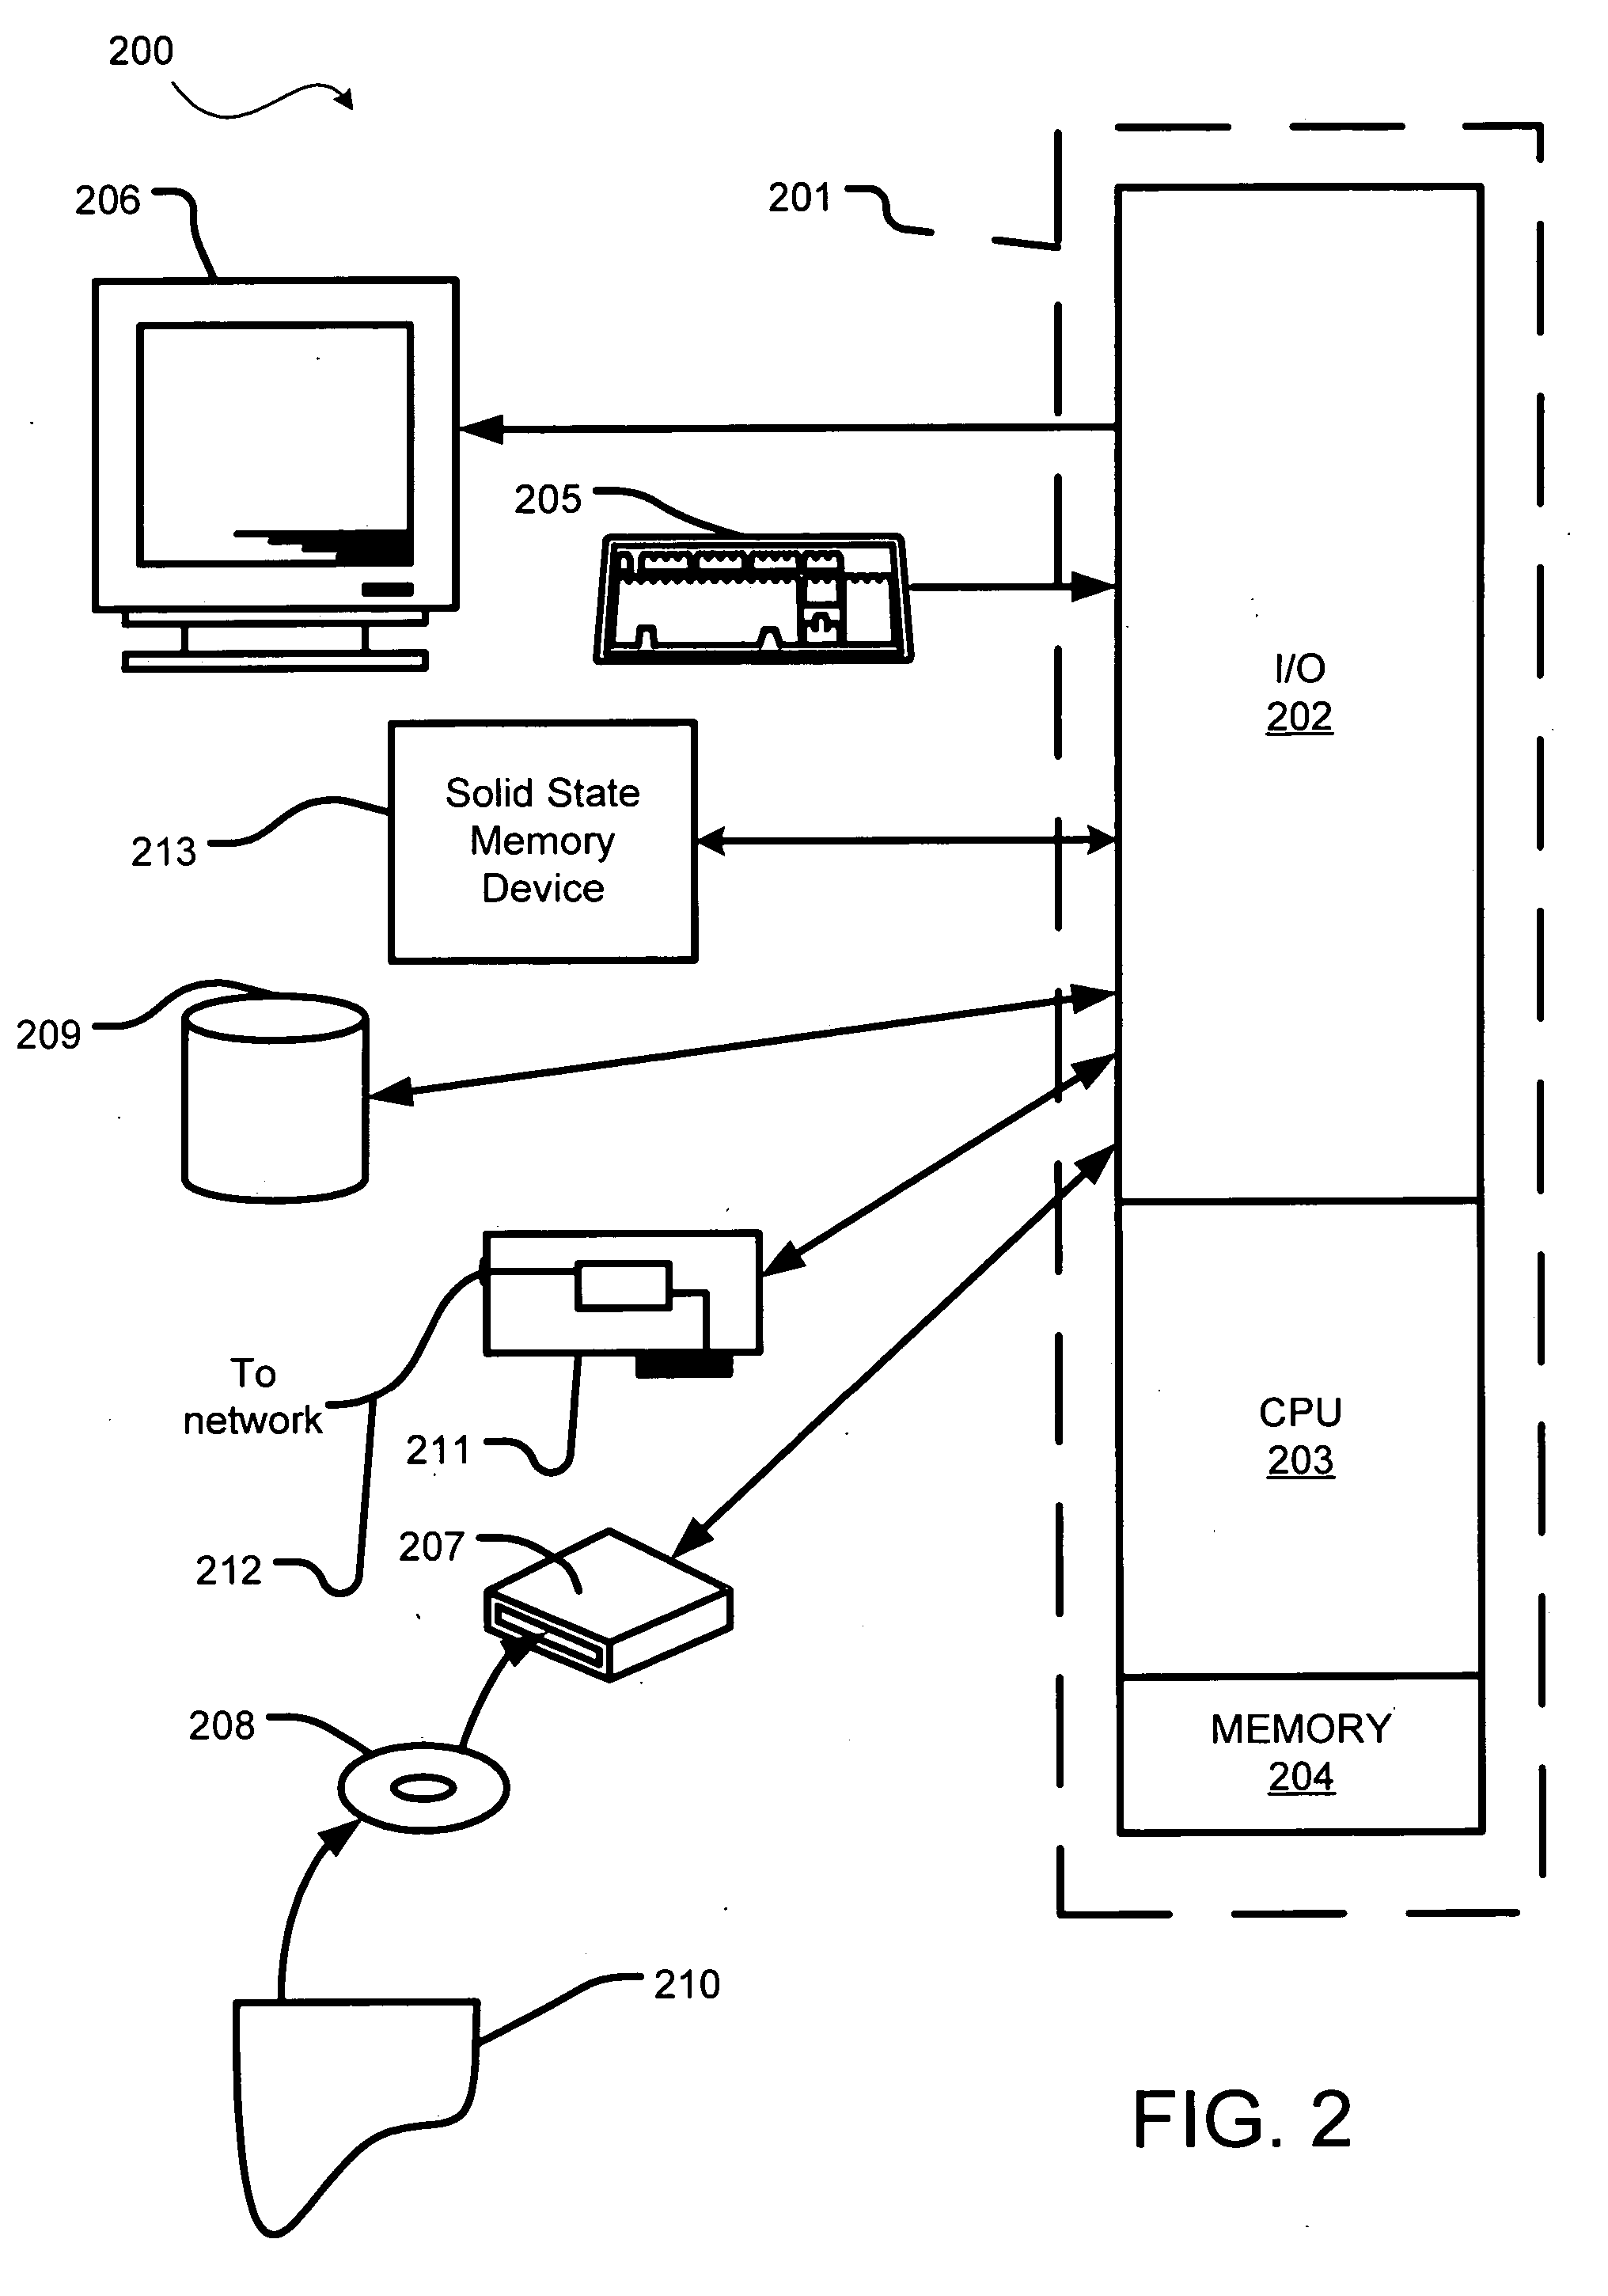 Method and system for installation and control of a utility device